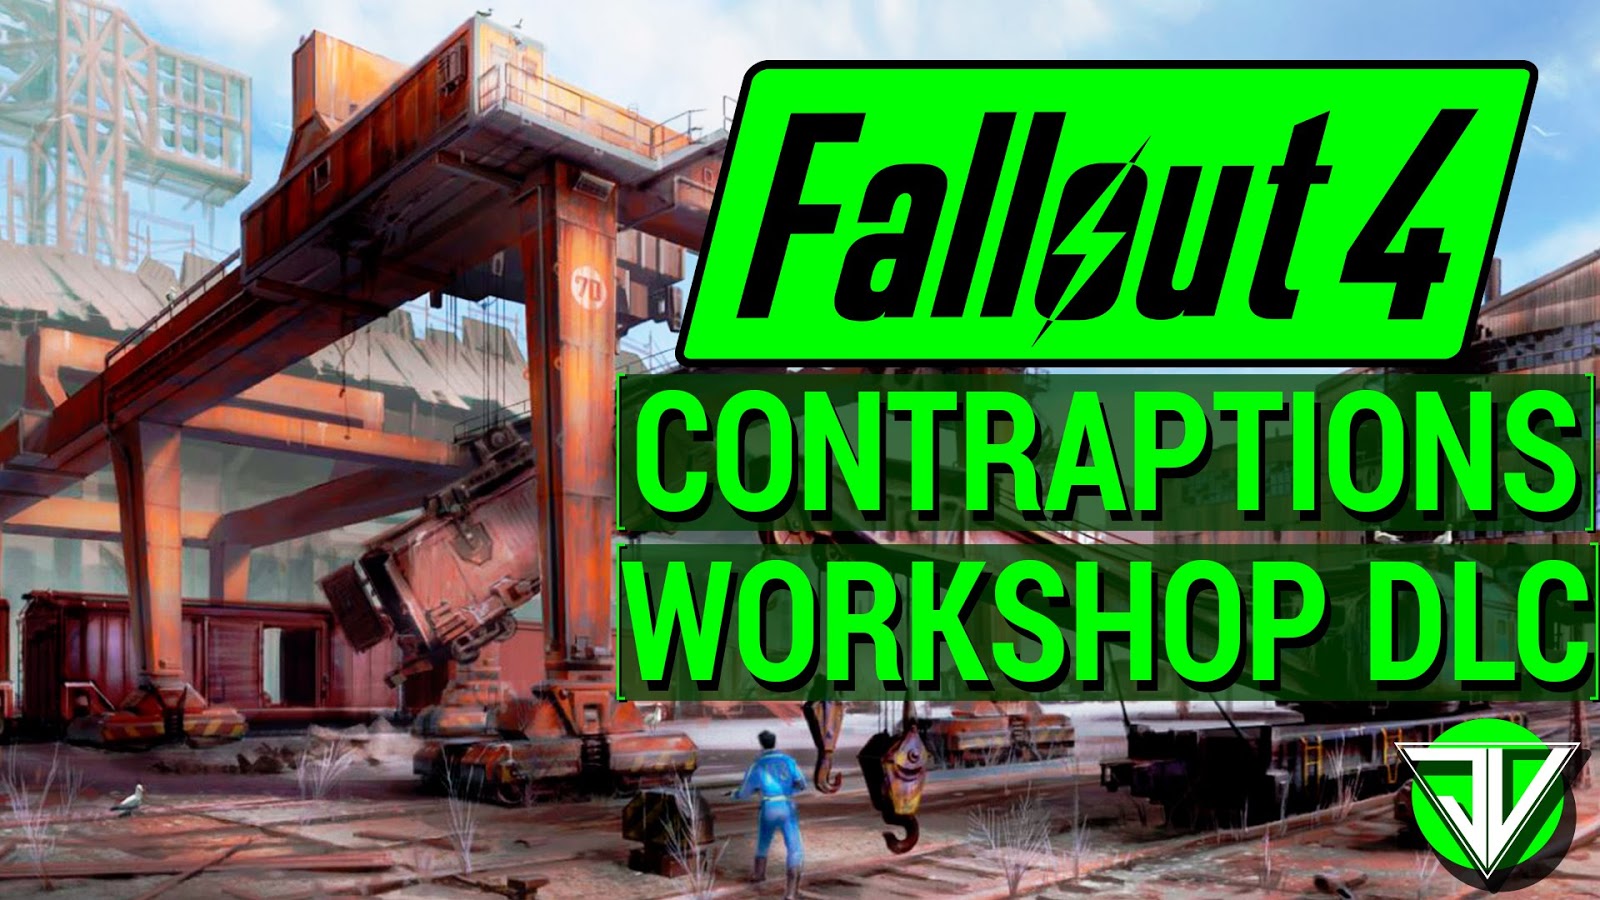 Contraption workshop fallout 4 фото 26